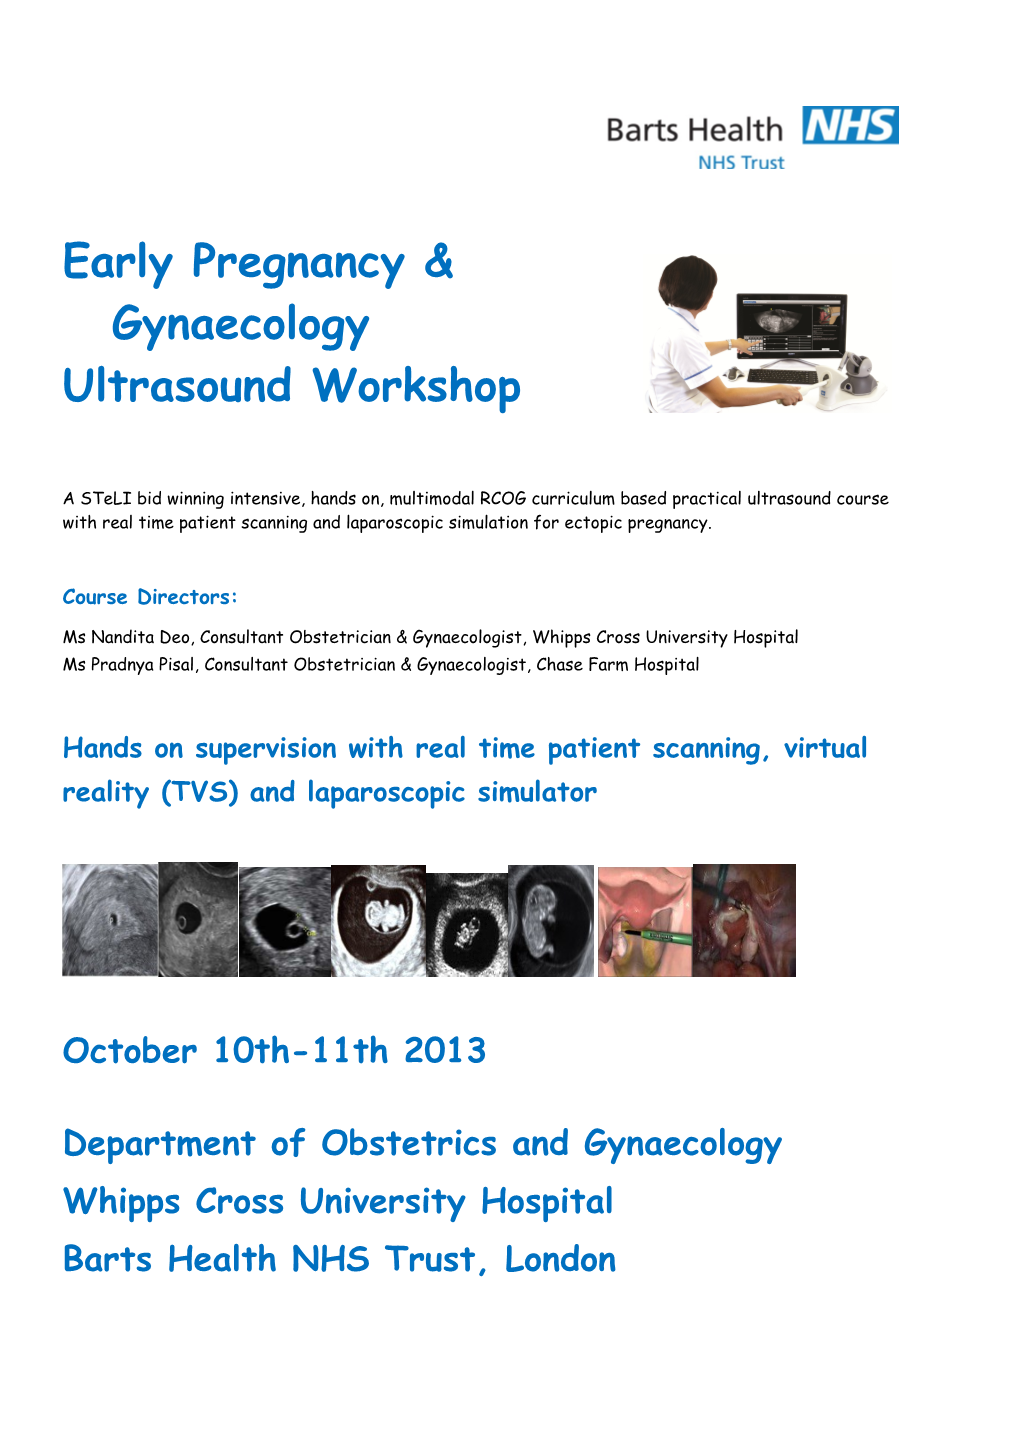 Early Pregnancy & Gynaecology